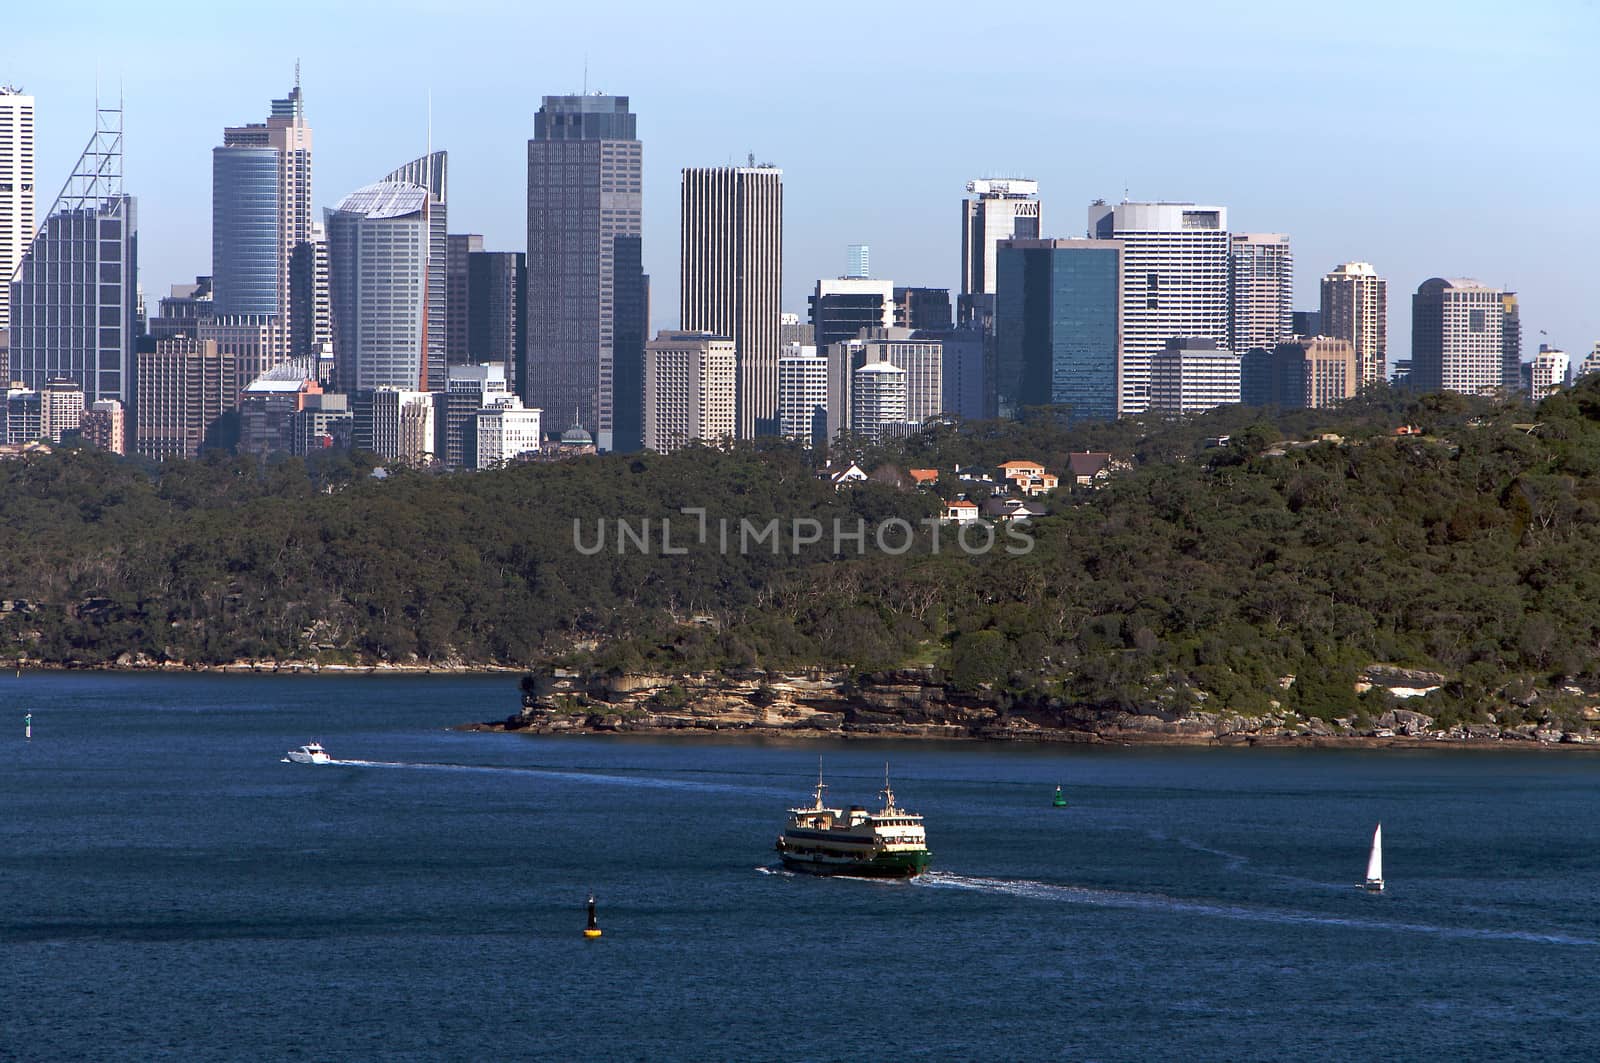 Sydney North Head view with city skyline in the background, Australia